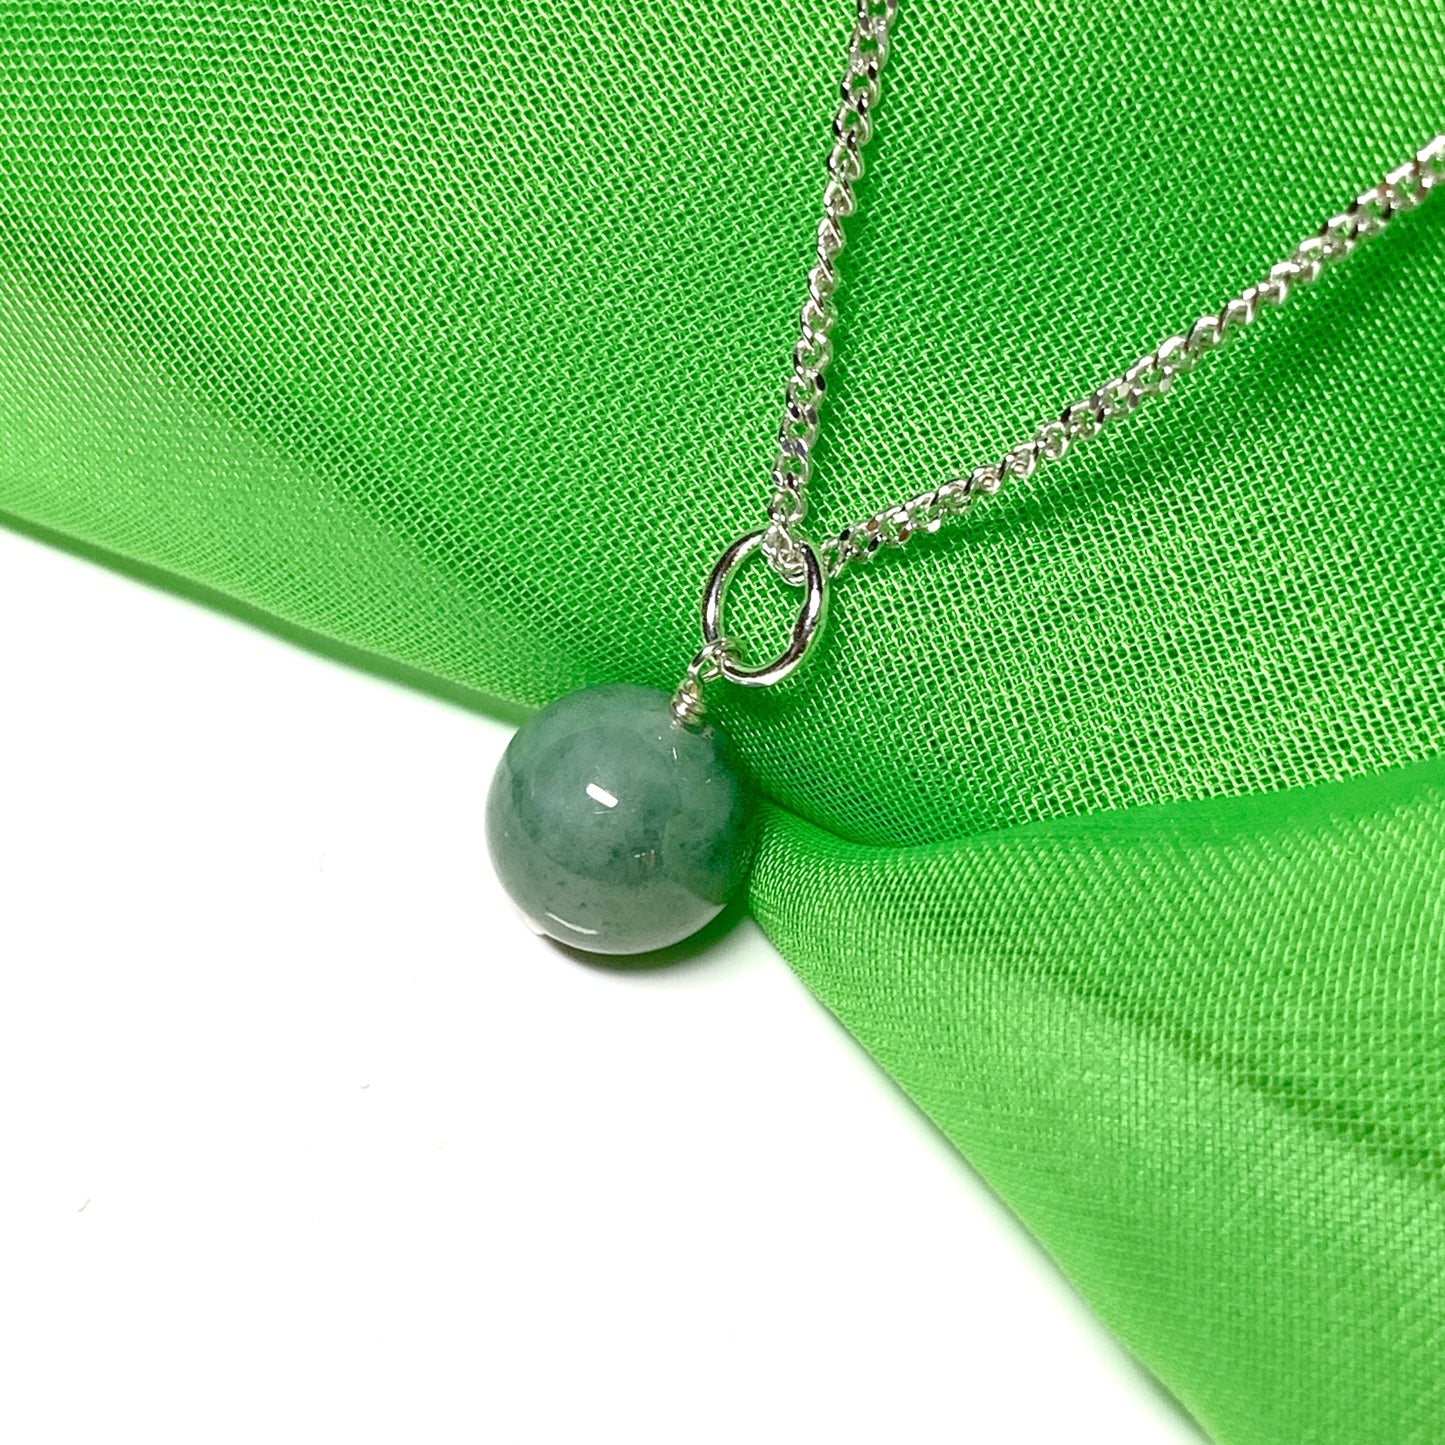 Jade silver necklace round ball shaped green pendant